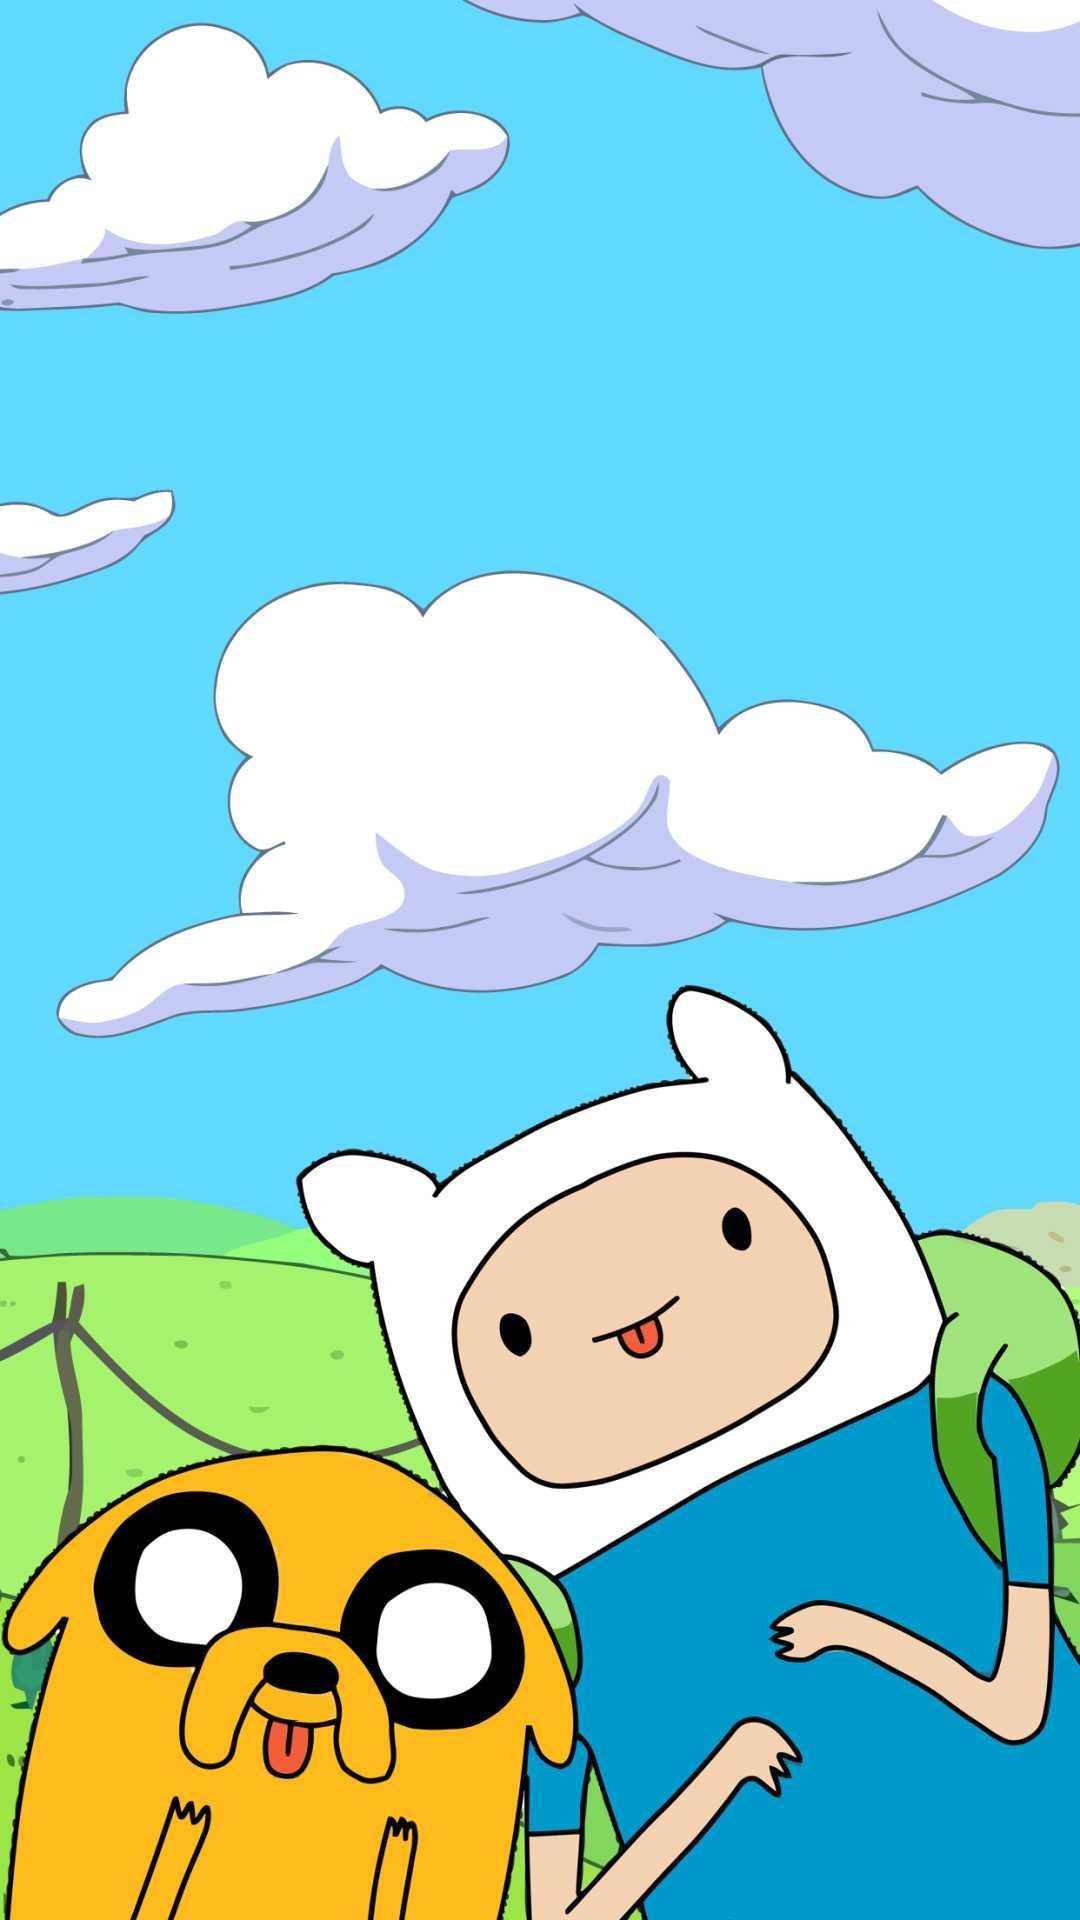 Adventure Time wallpaper, Anime style, Finn and Jake, Jake the dog, 1080x1920 Full HD Handy